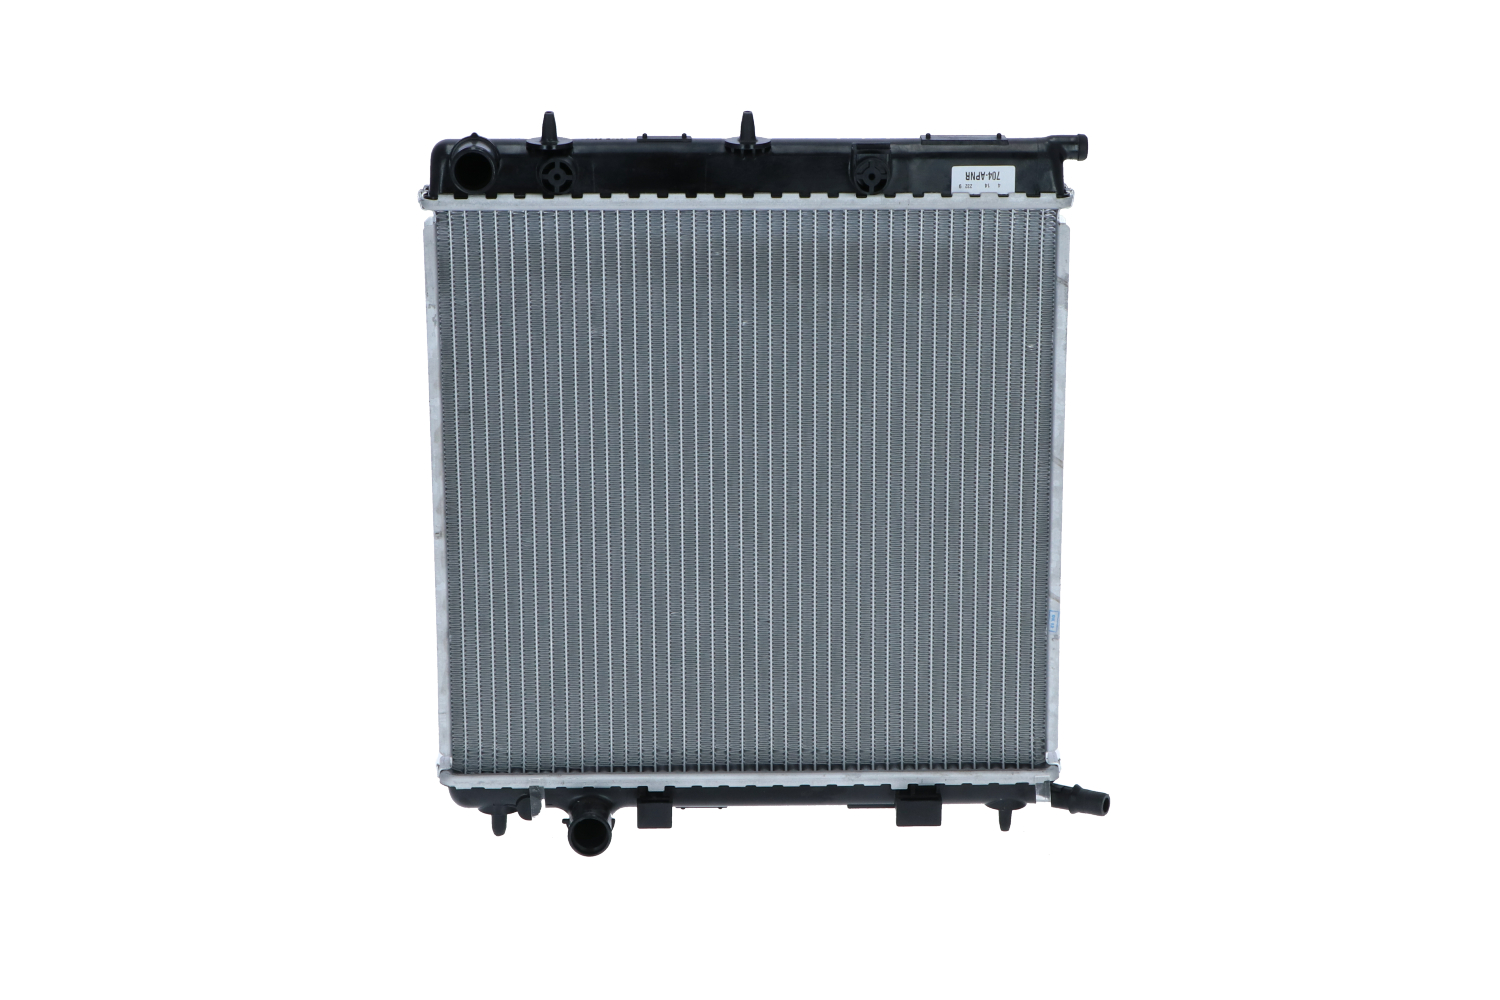 NRF 53863 Engine radiator Aluminium, 396 x 380 x 18 mm, with mounting parts, Brazed cooling fins